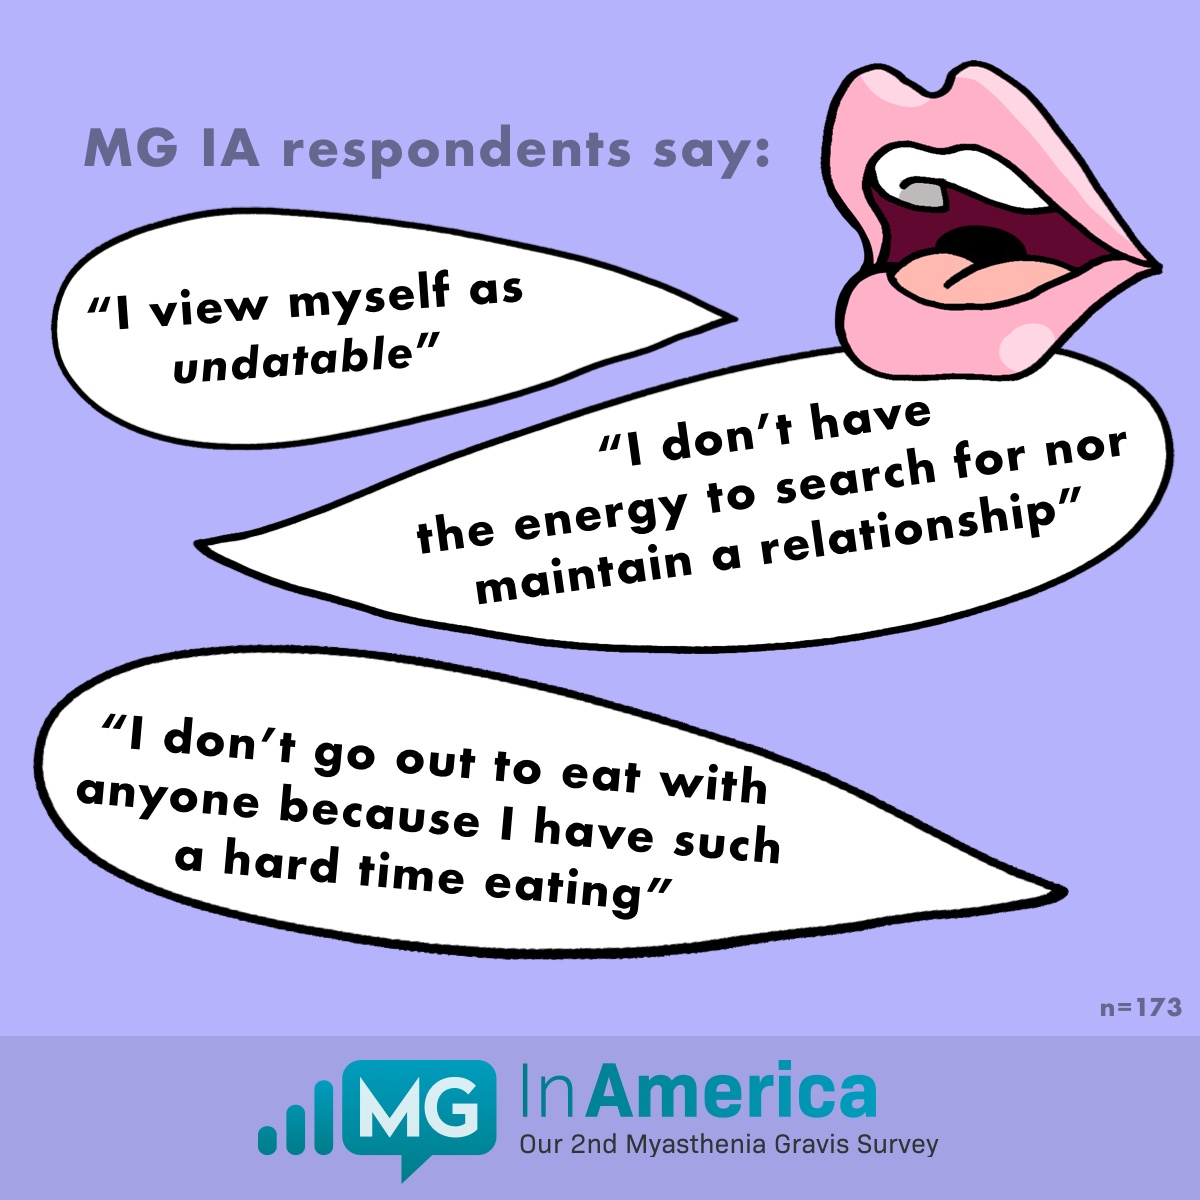 Respondents are quoted discussing the impact of dating while living with myasthenia gravis.